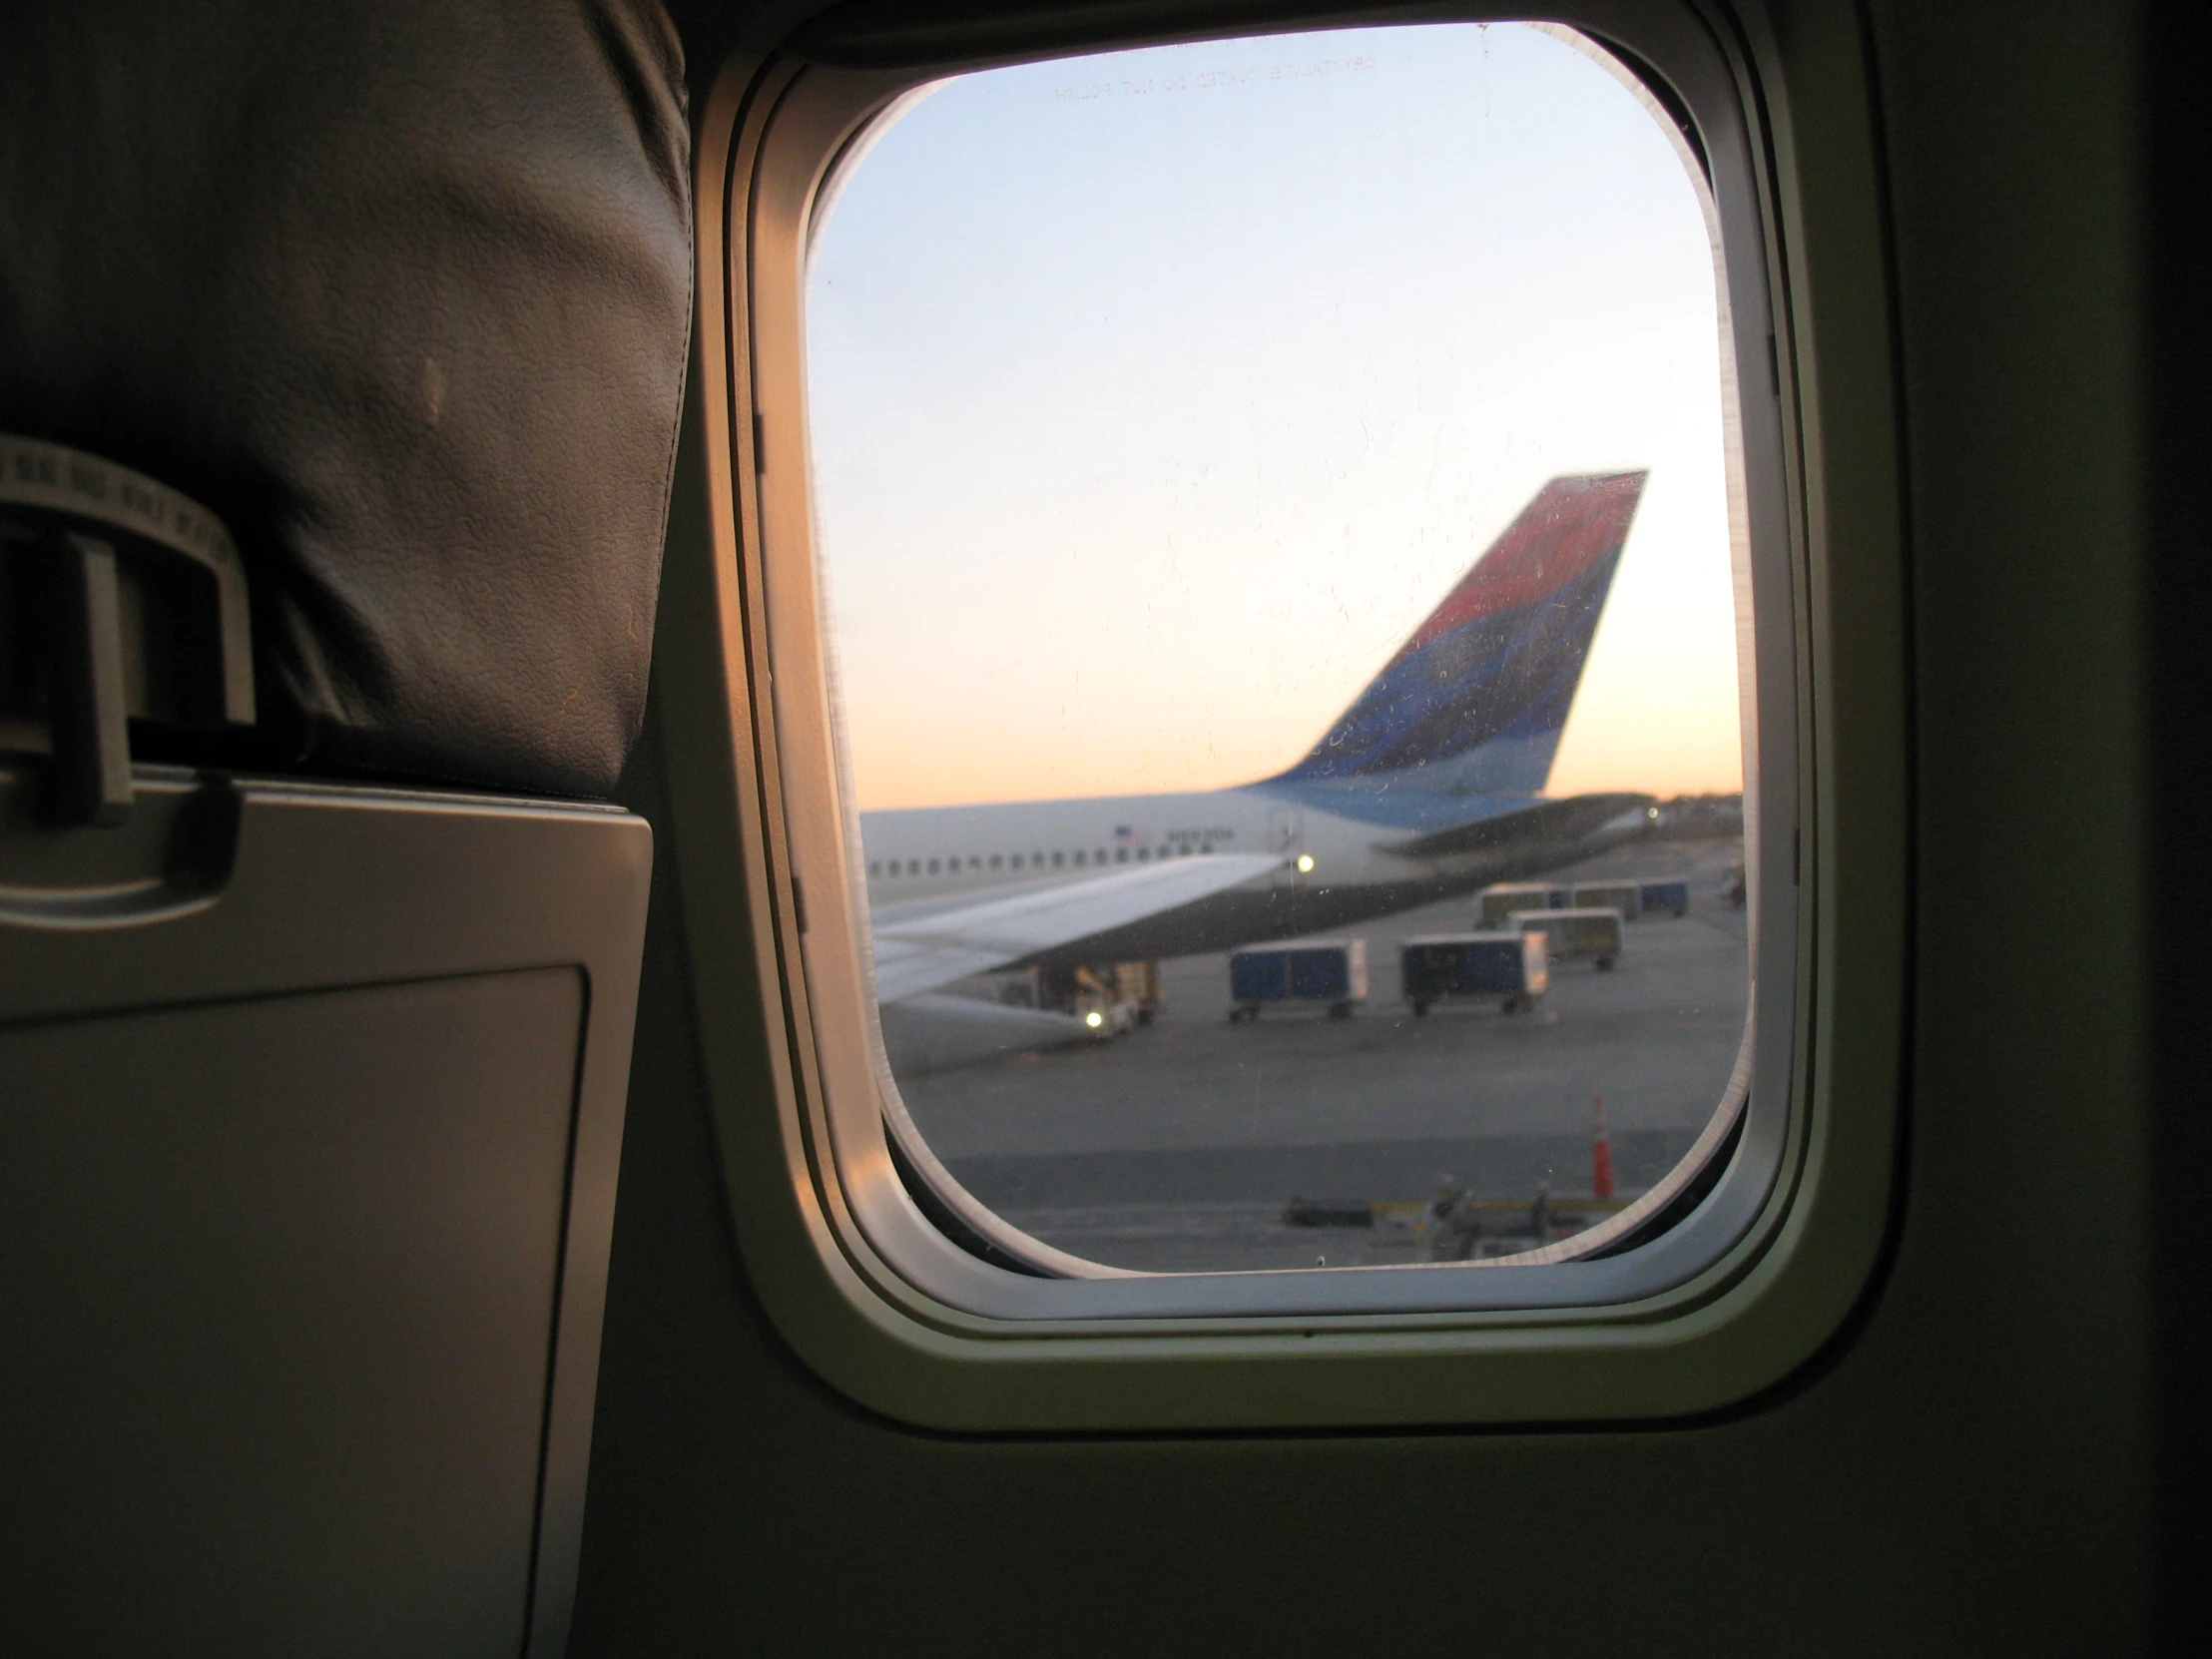 looking out an airplane window at the plane landing